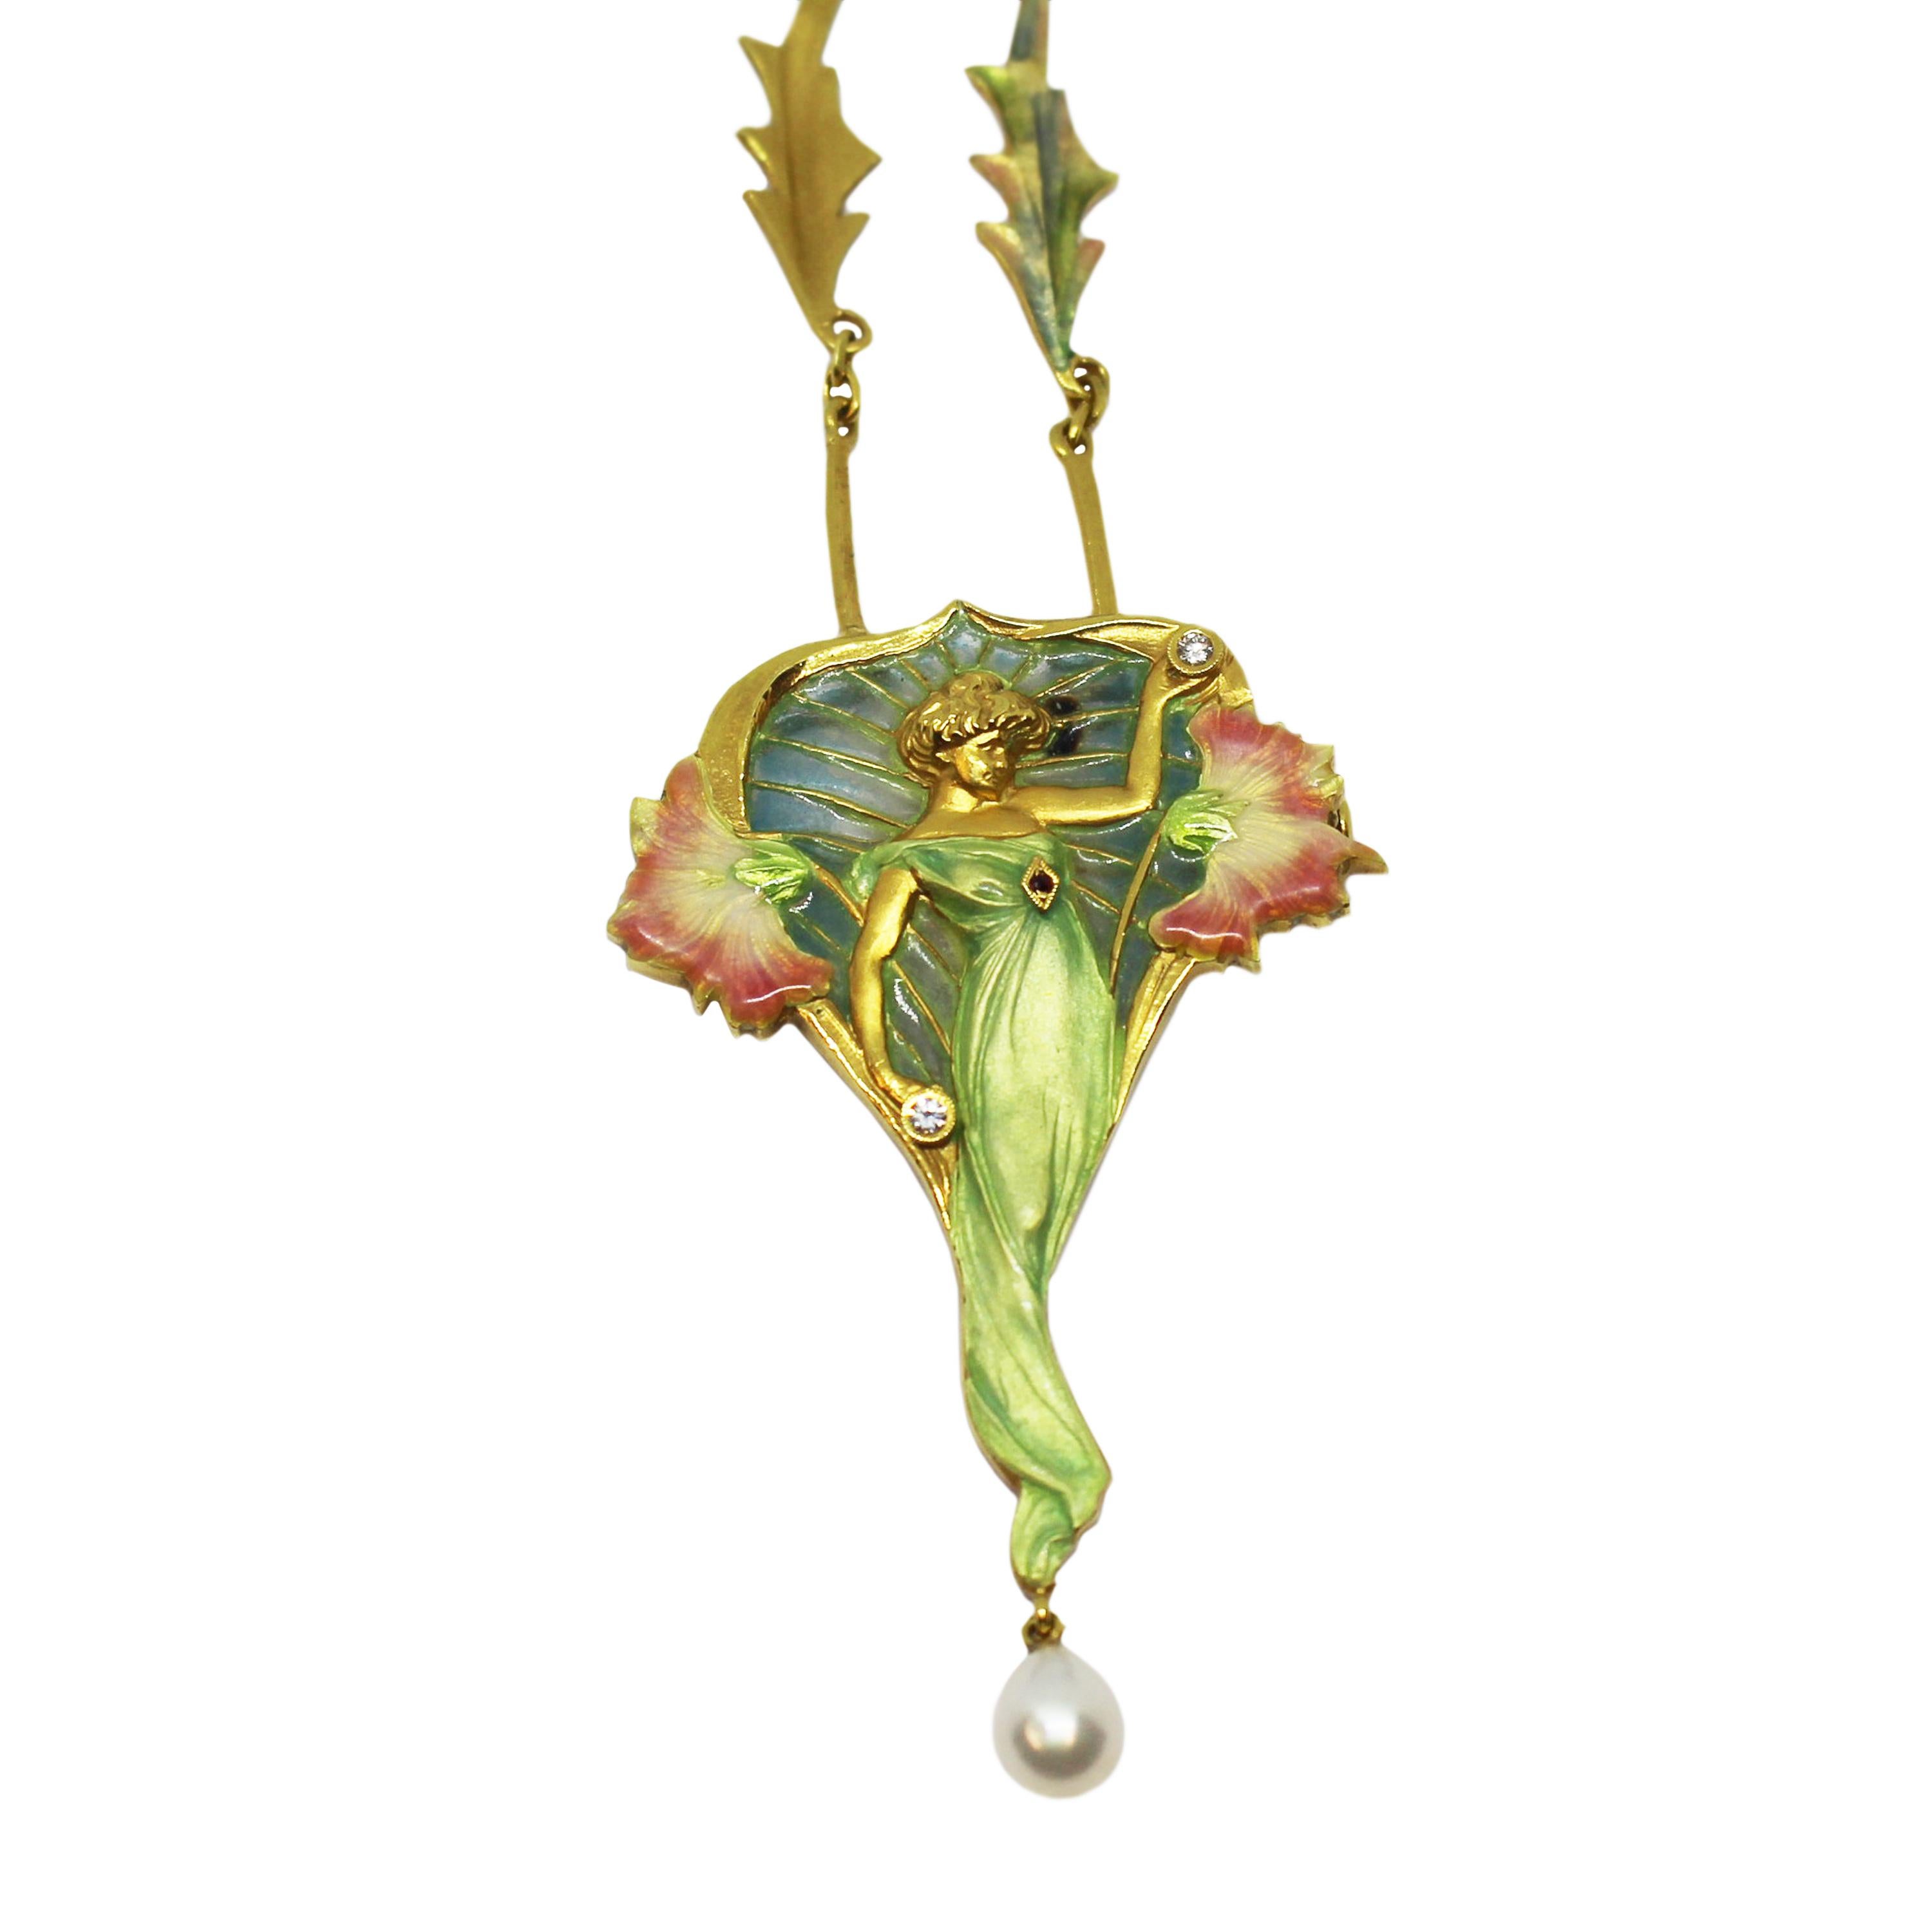 Circa 2000 Luis Masriera Spain Art Nouveau Figural pin Pendant. 18K Yellow Gold and having amazing Guilloche and Plique Enamel and further set with a Diamond, Rubies and a 7 MM pearl at the bottom. The pendant portion is detachable to be worn